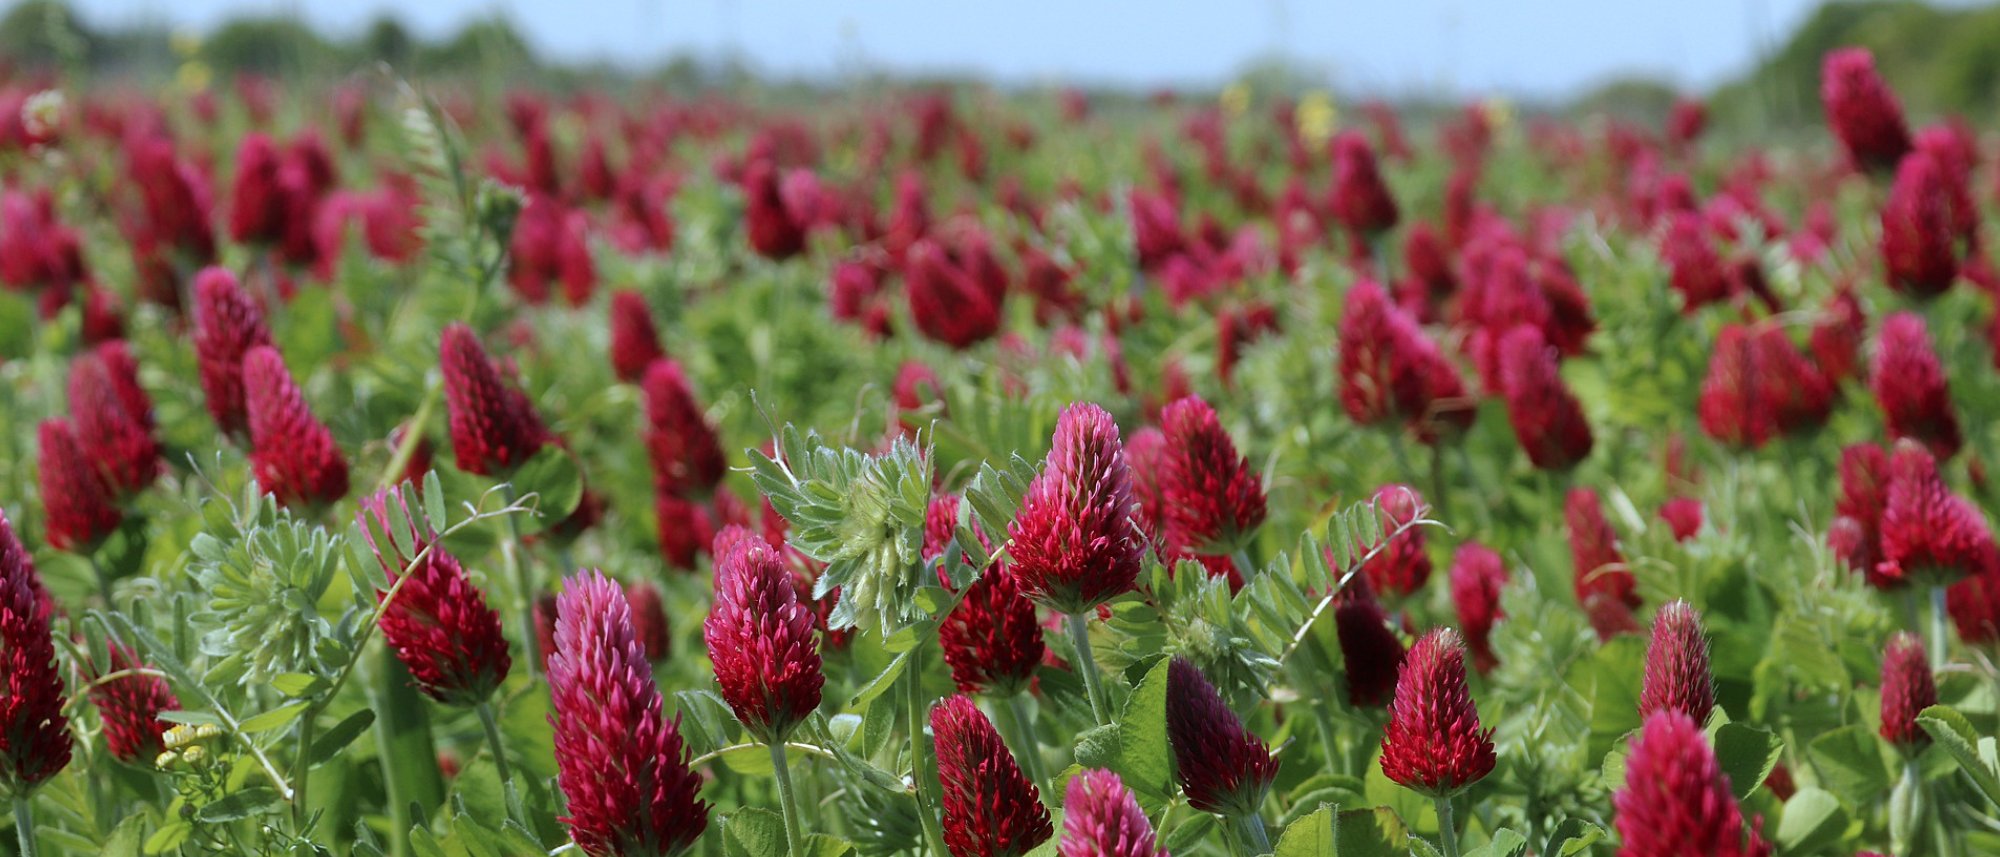 Grow clover cover crops